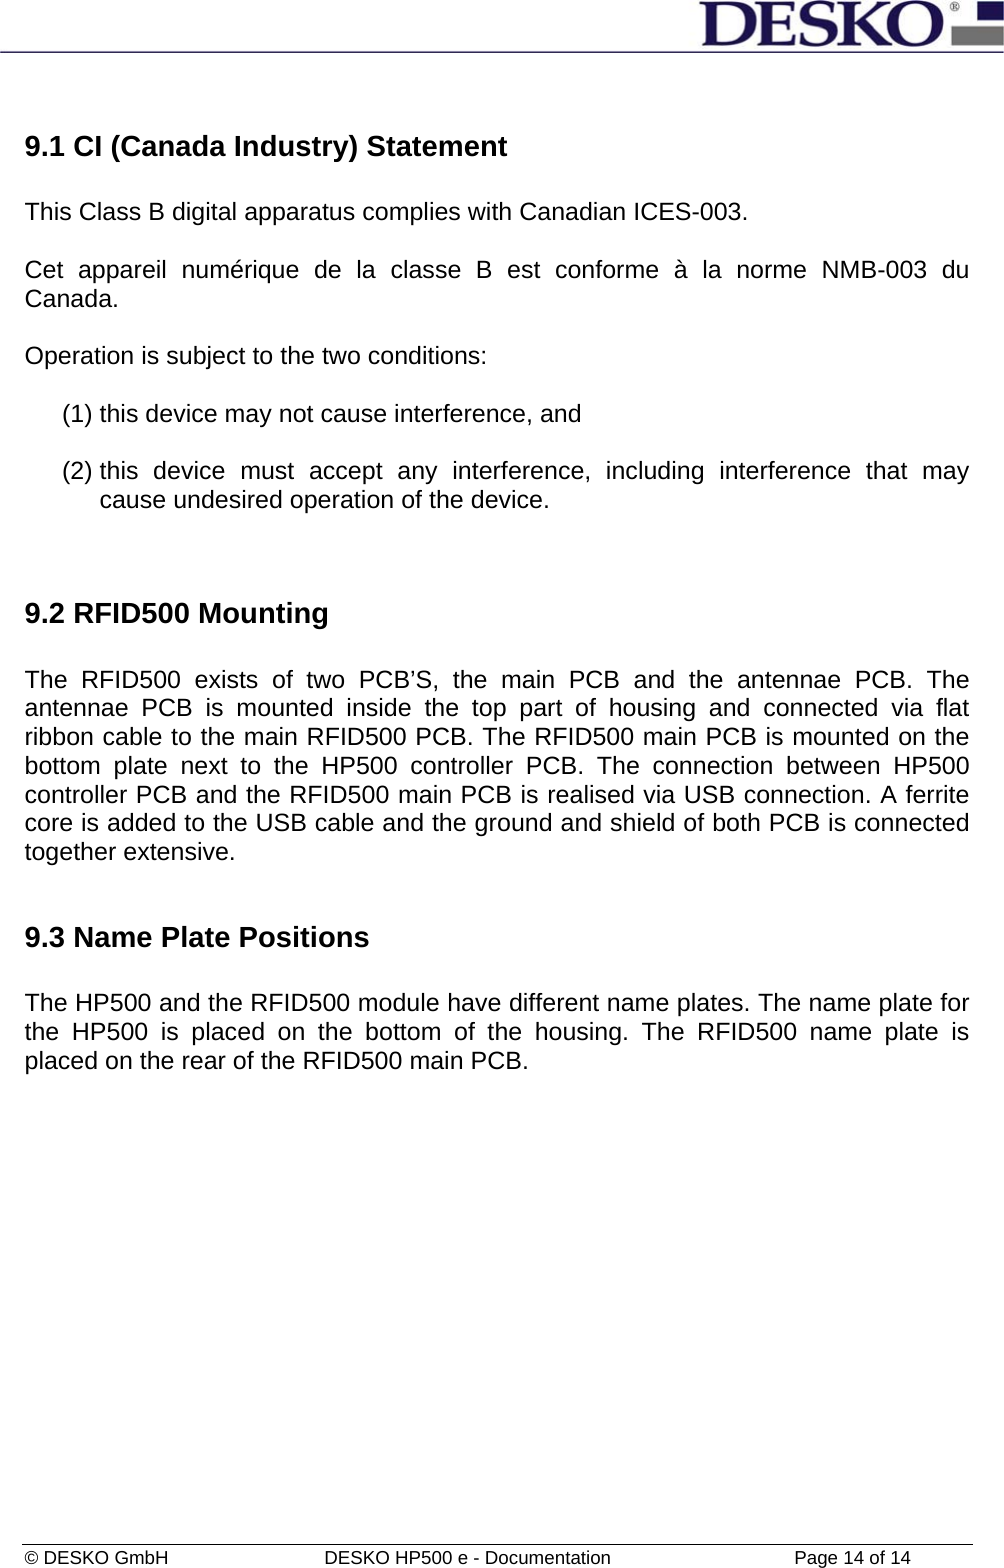  © DESKO GmbH   DESKO HP500 e - Documentation                  Page 14 of 14  9.1 CI (Canada Industry) Statement  This Class B digital apparatus complies with Canadian ICES-003.  Cet appareil numérique de la classe B est conforme à la norme NMB-003 du Canada.  Operation is subject to the two conditions:  (1) this device may not cause interference, and  (2) this device must accept any interference, including interference that may cause undesired operation of the device.   9.2 RFID500 Mounting  The RFID500 exists of two PCB’S, the main PCB and the antennae PCB. The antennae PCB is mounted inside the top part of housing and connected via flat ribbon cable to the main RFID500 PCB. The RFID500 main PCB is mounted on the bottom plate next to the HP500 controller PCB. The connection between HP500 controller PCB and the RFID500 main PCB is realised via USB connection. A ferrite core is added to the USB cable and the ground and shield of both PCB is connected together extensive.   9.3 Name Plate Positions  The HP500 and the RFID500 module have different name plates. The name plate for the HP500 is placed on the bottom of the housing. The RFID500 name plate is placed on the rear of the RFID500 main PCB. 